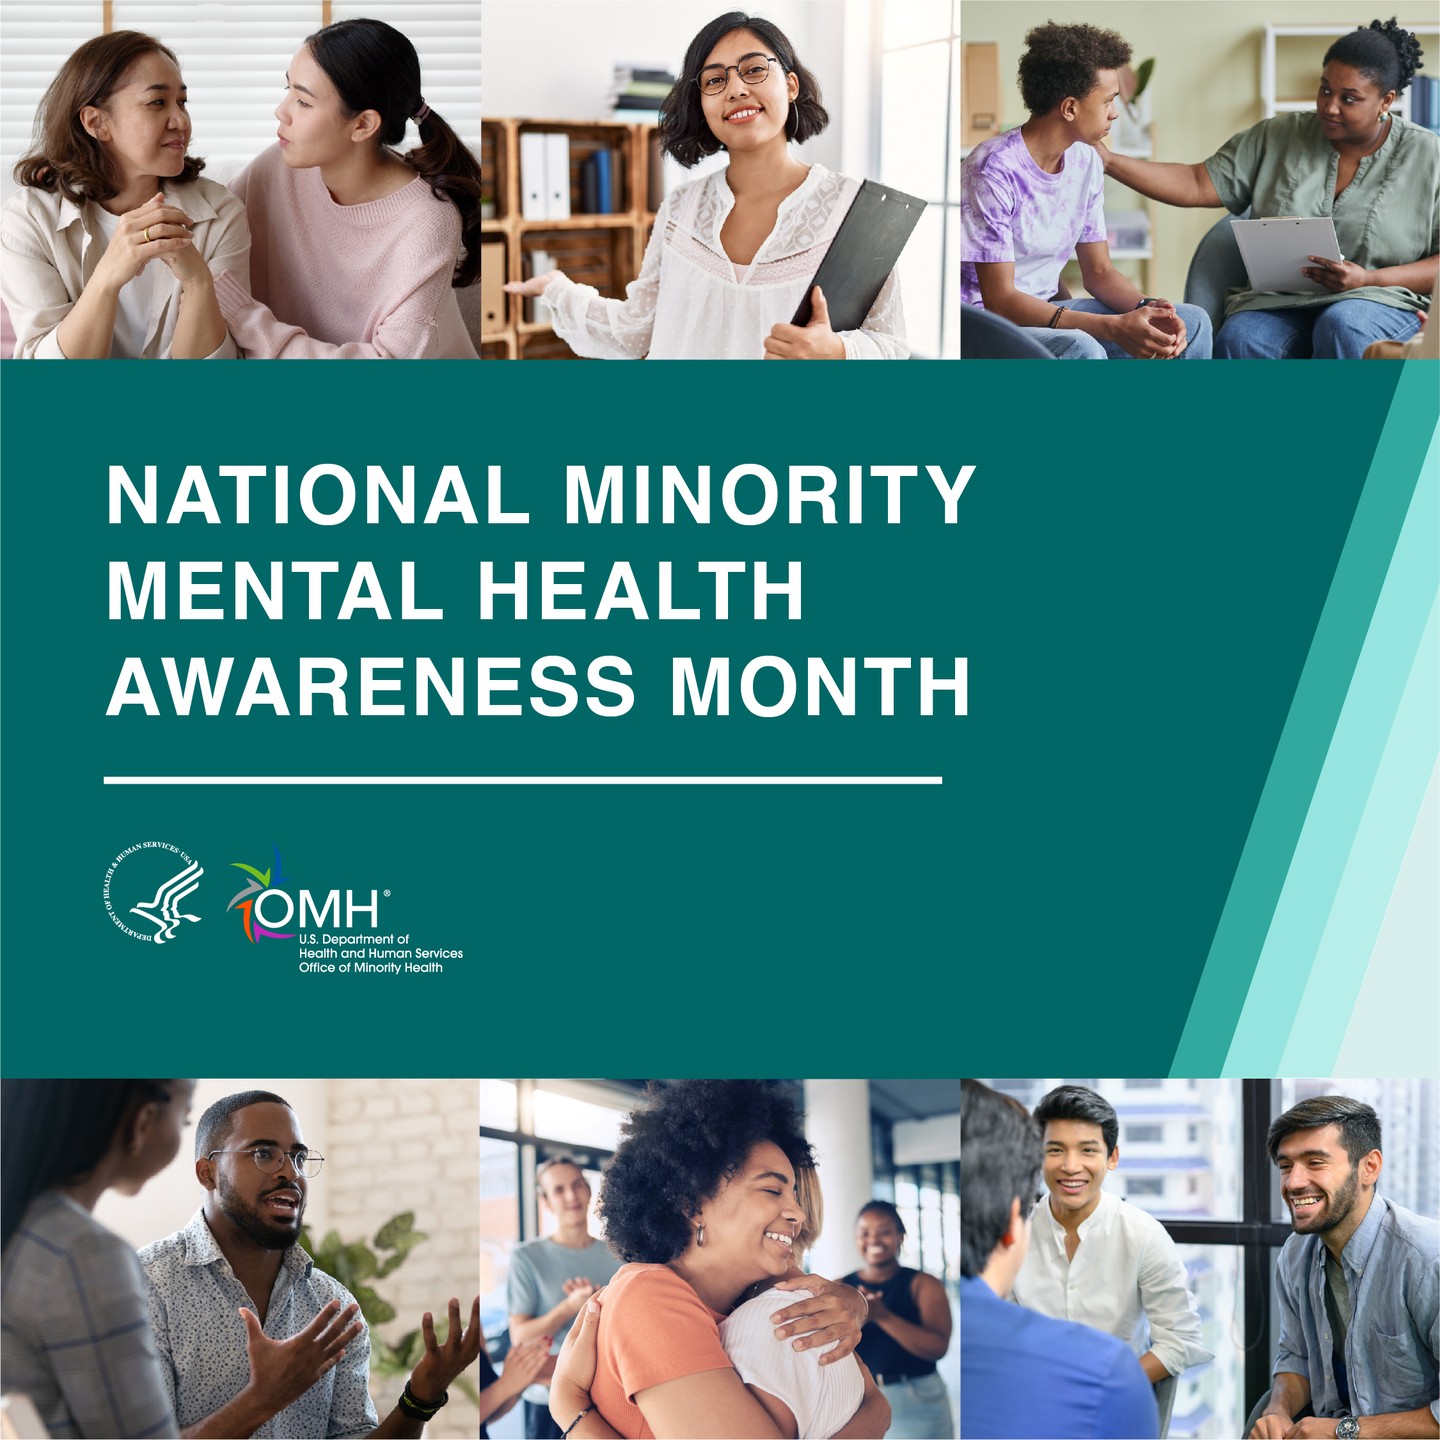 July is National Minority Mental Health Awareness Month. According to the CDC and HHS, Americans from racial and ethnic minority groups face unique additional challenges in receiving adequate mental health care, resulting in lower rates of treatment and diagnosis.Like other areas of health care, there is a notable lack of mental health equity. According to a study conducted by SAMHSA, an estimated 39 percent of Black or African American adults, 25 percent of Asian adults, and 36 percent of Hispanic/Latino adults with any mental illness were treated, compared to 52 percent of non-Hispanic white adults. The same study showed that suicide was the leading cause of death among Asian Americans and Pacific Islanders aged 10 to 19 and it was the second leading cause of death among those aged 20 to 34. (www.samhsa.gov)"Advance Better Mental Health Through Better Understanding" this #MinorityMentalHealth month. Learn more by exploring the resources @minorityhealth has available. Help to address health disparities impacting the mental well-being of racial and ethnic minority communities by learning more and taking action. Learn more here: https://minorityhealth.hhs.gov/minority-mental-health/ #MinorityHealth #MentalHealth #HealthEquity #MentalHealthEquity#BehavioralHealth